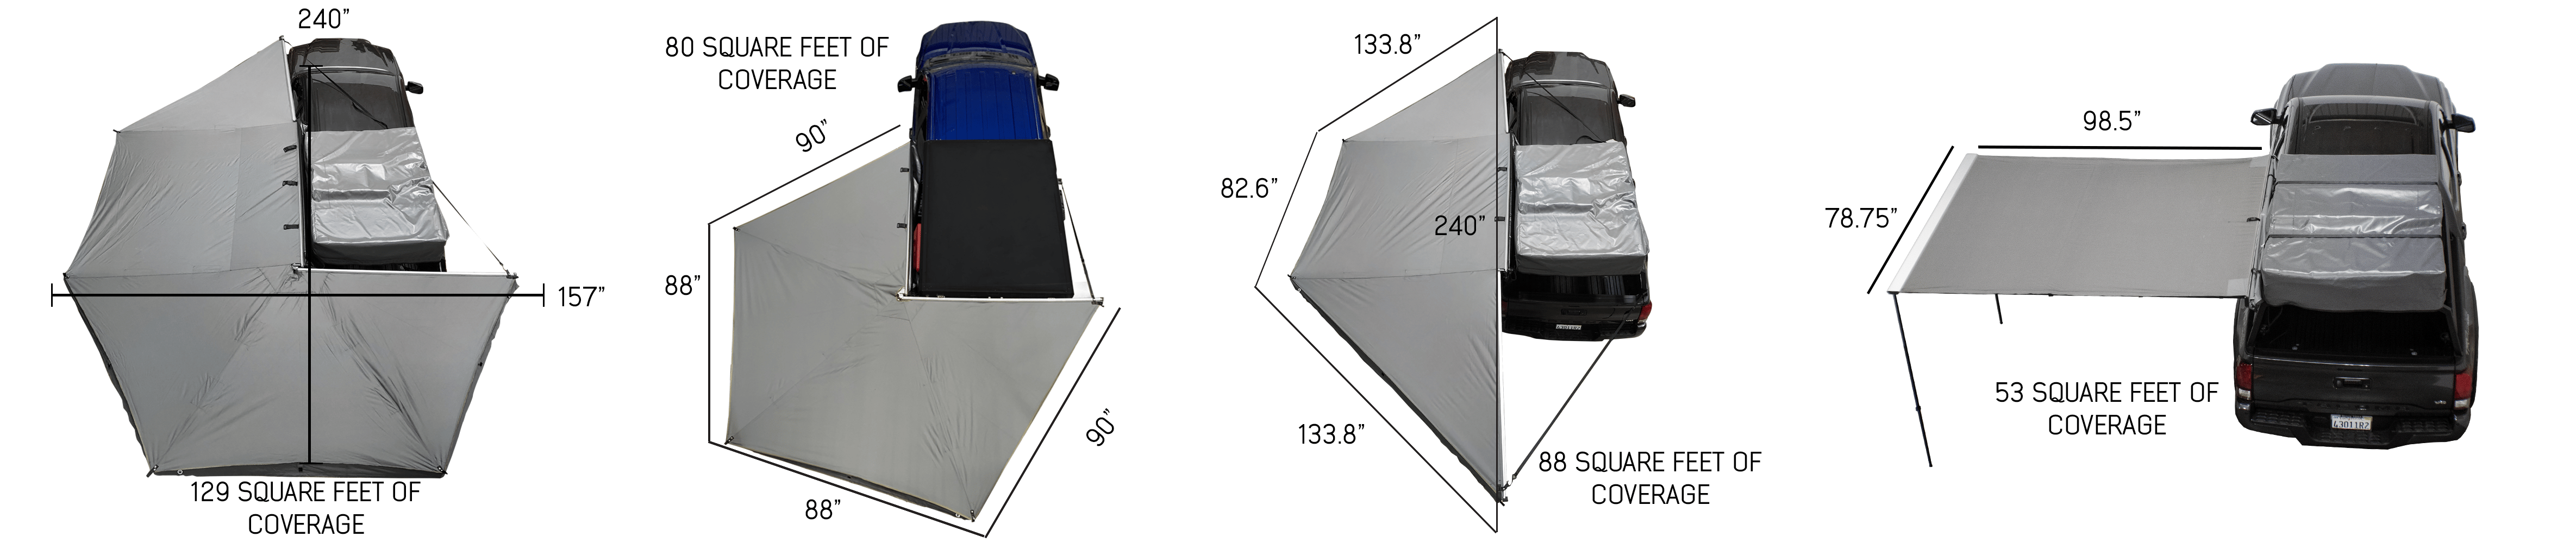 OVS Nomadic Awning 180 Degree - With Zip In Wall